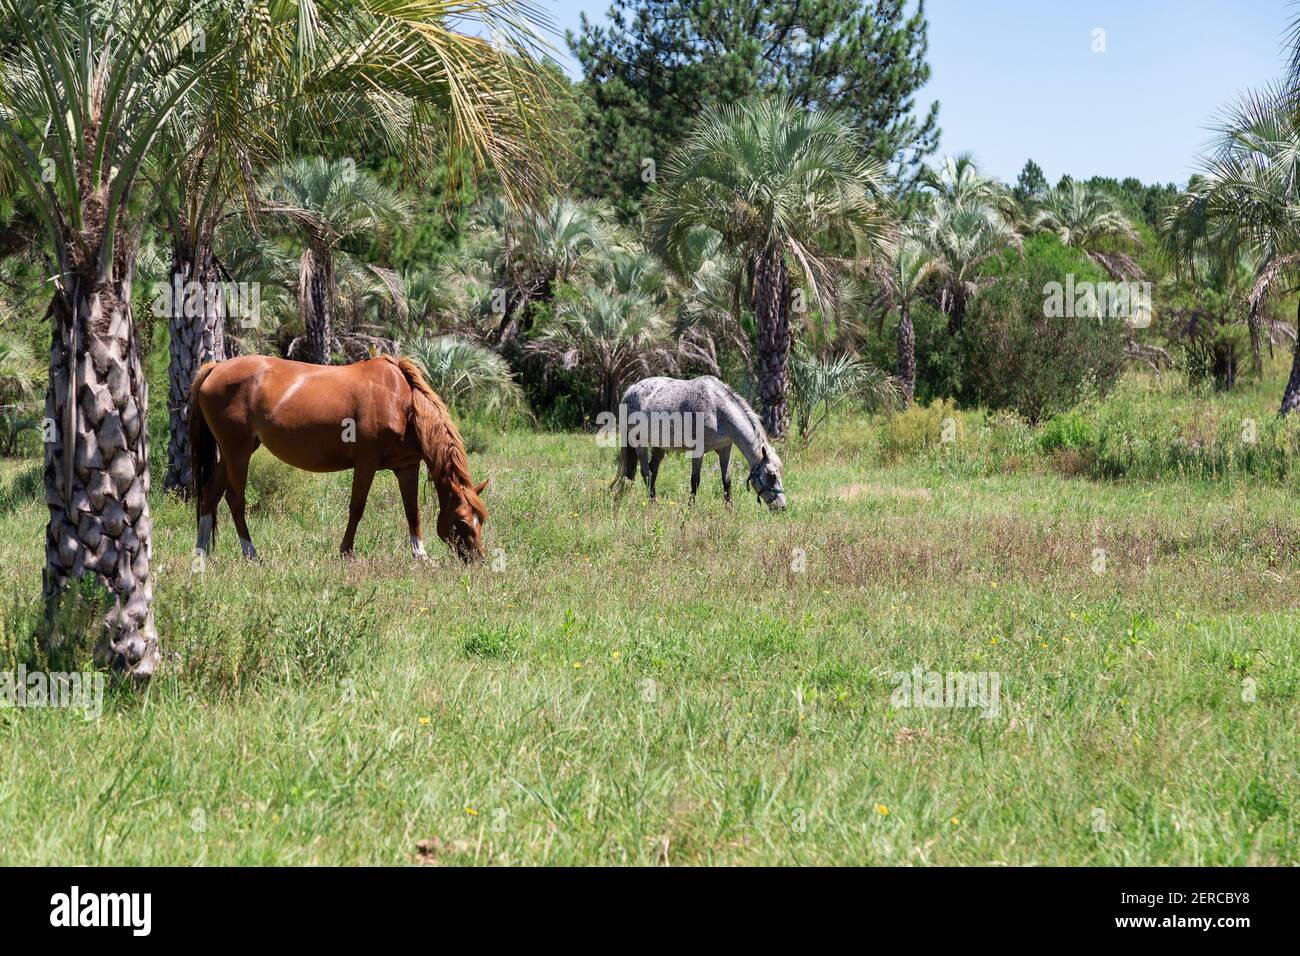 Two horses grazing in the meadow, near Colon Entre Rios, Argentina. Rural landscape with palm trees. One horse brown and other gray. Sunny day of summ Stock Photo